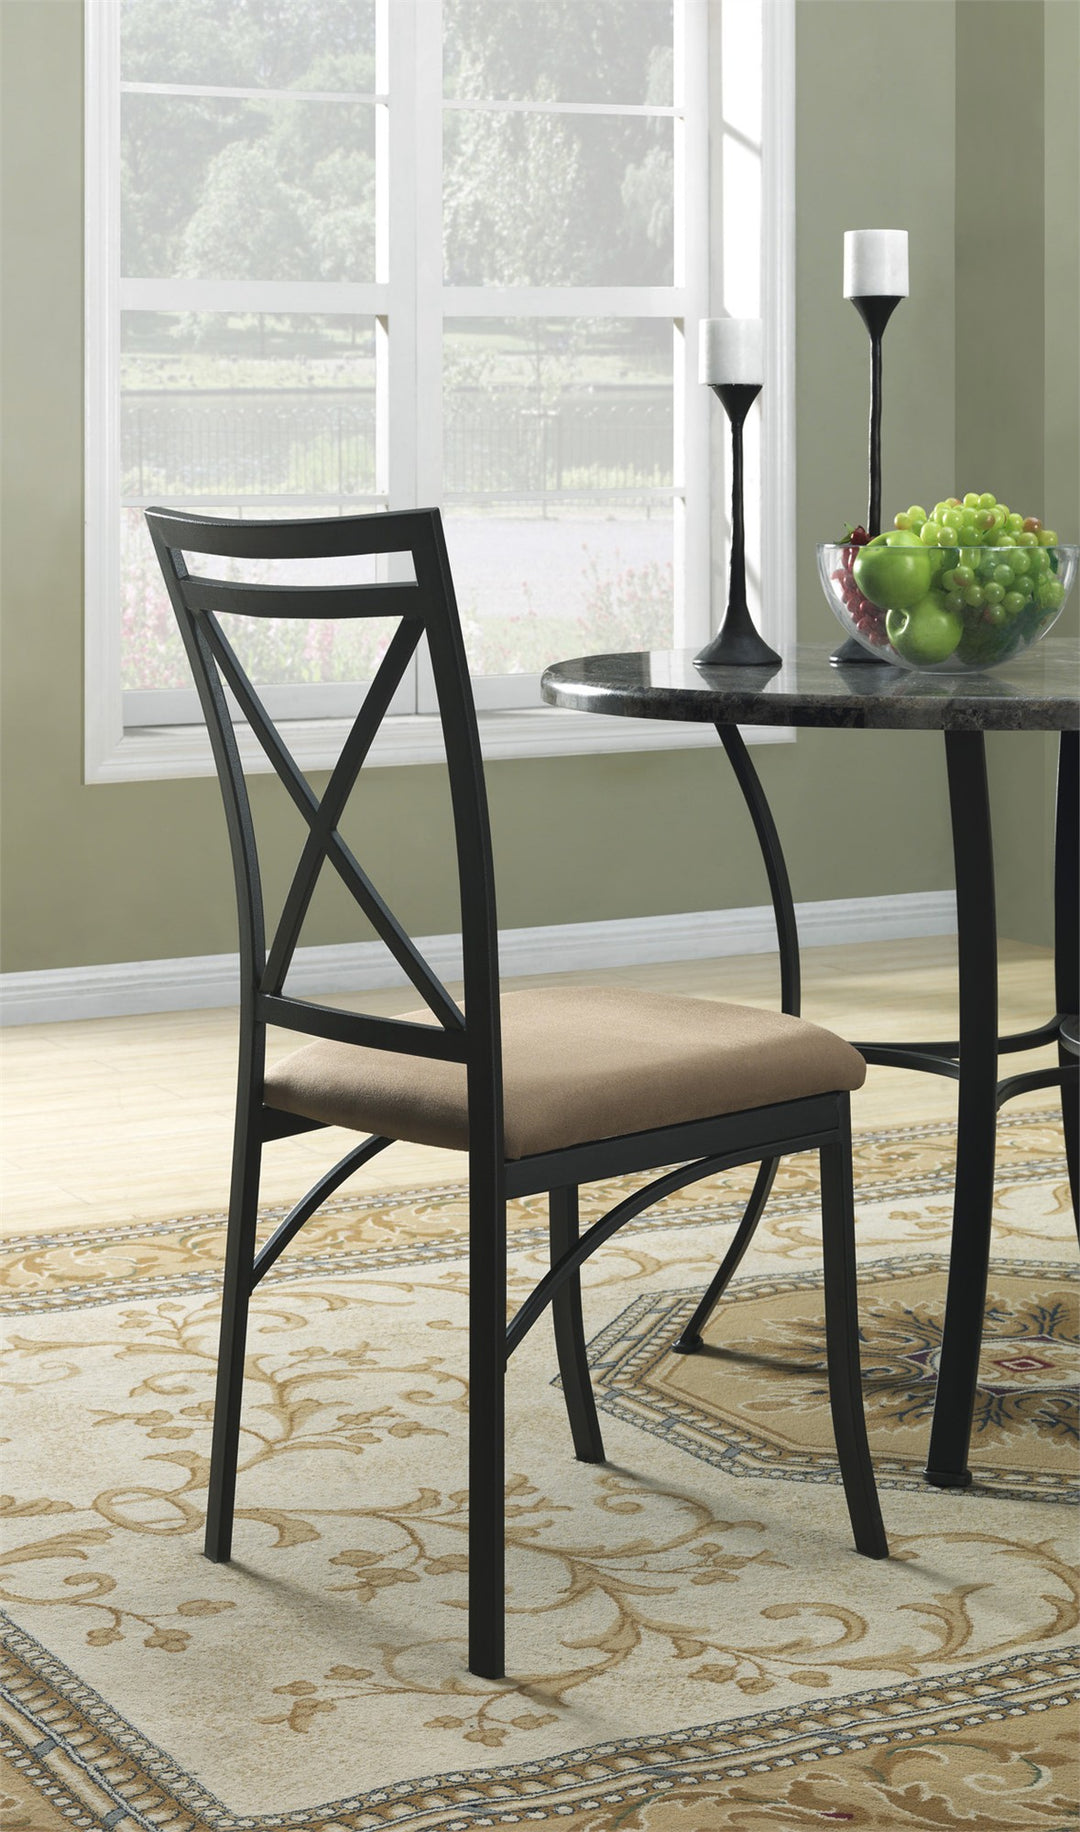 Faux Marble Top Dining Table Set 5 Piece Metal Frame -  Black Coffee